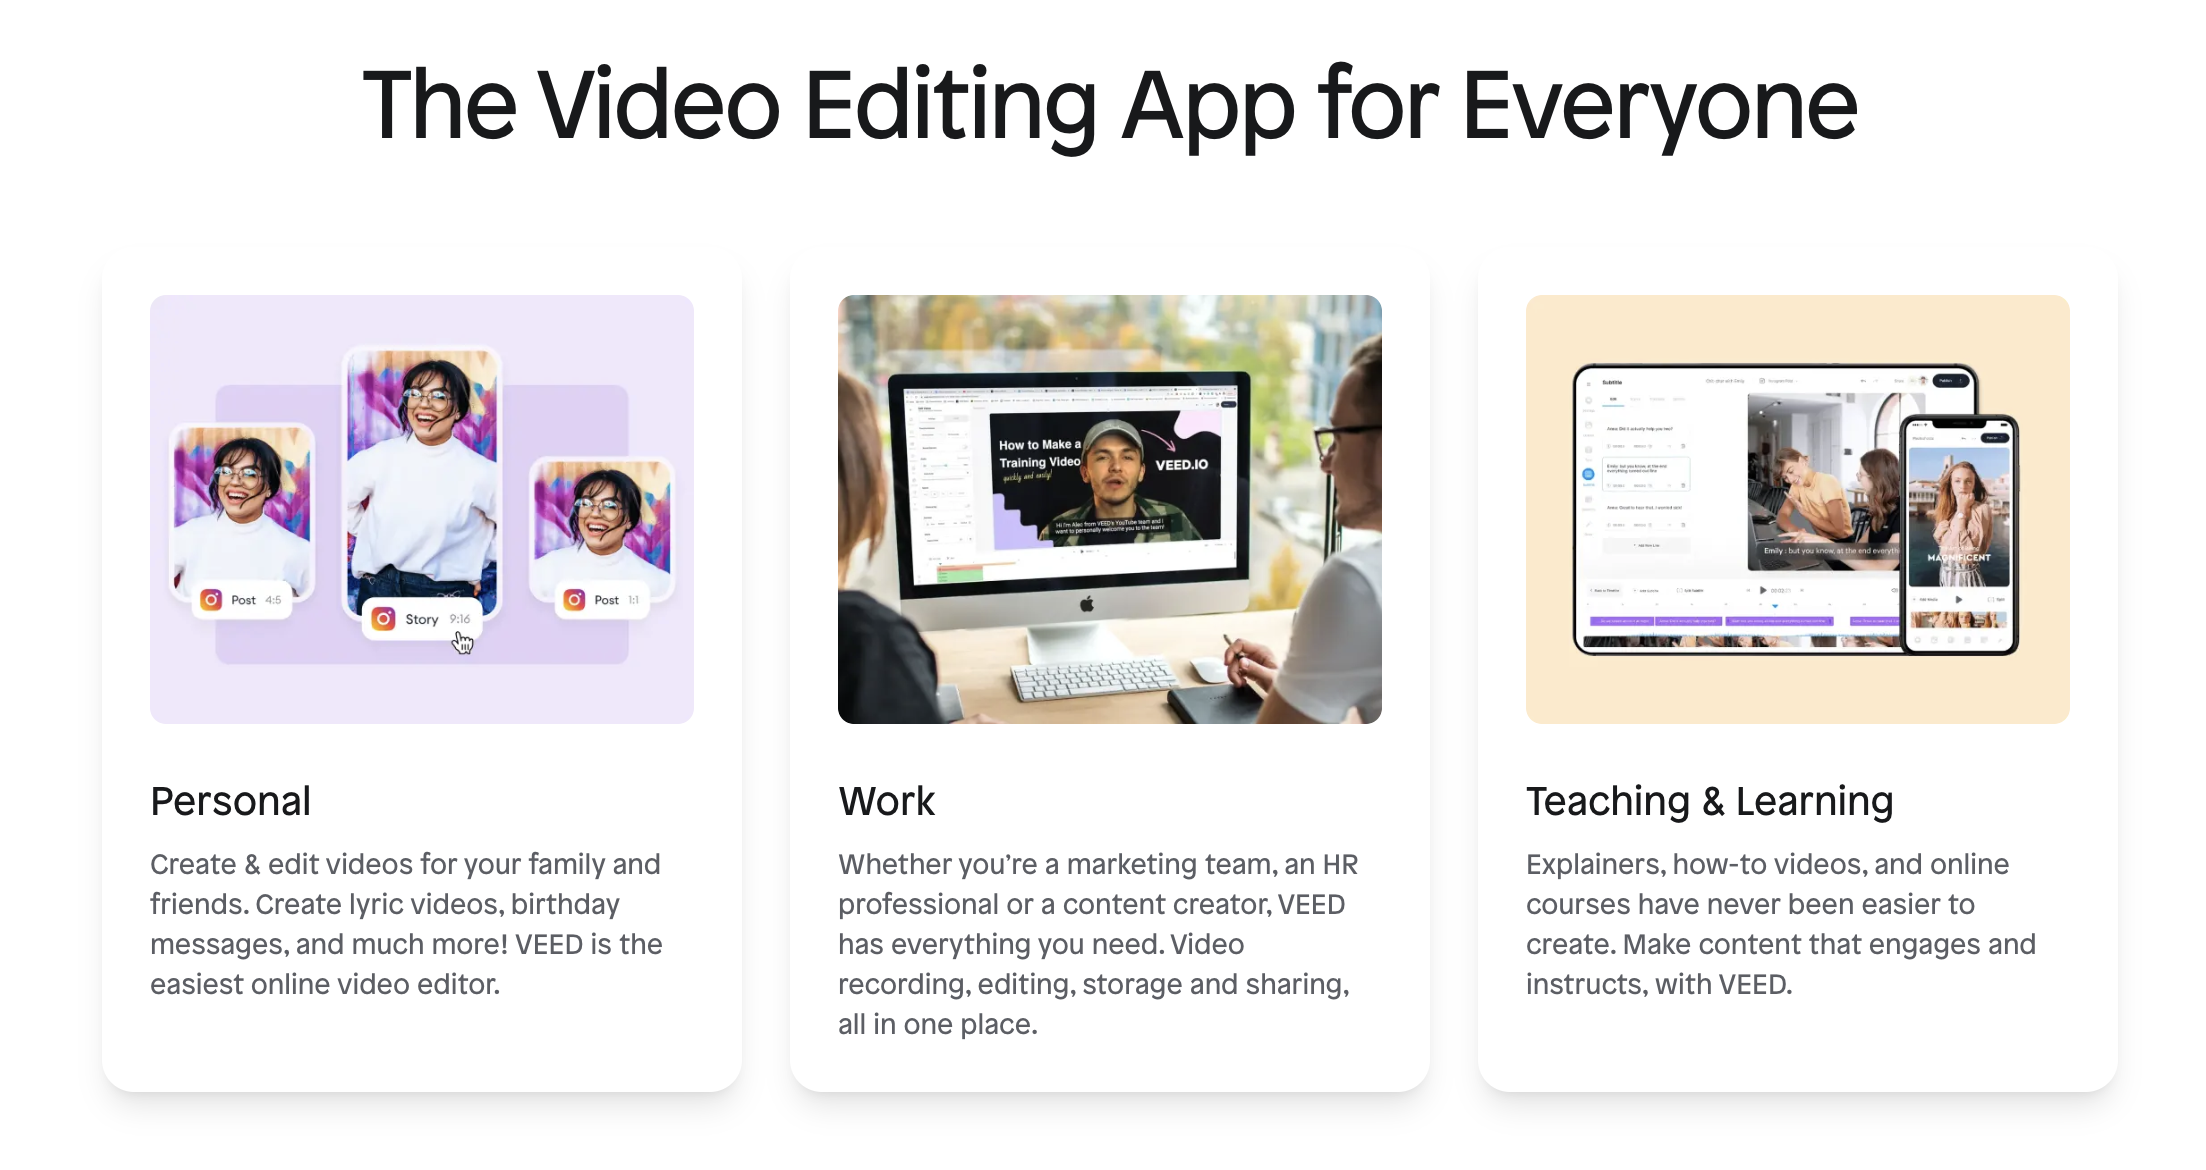 Video editing apps